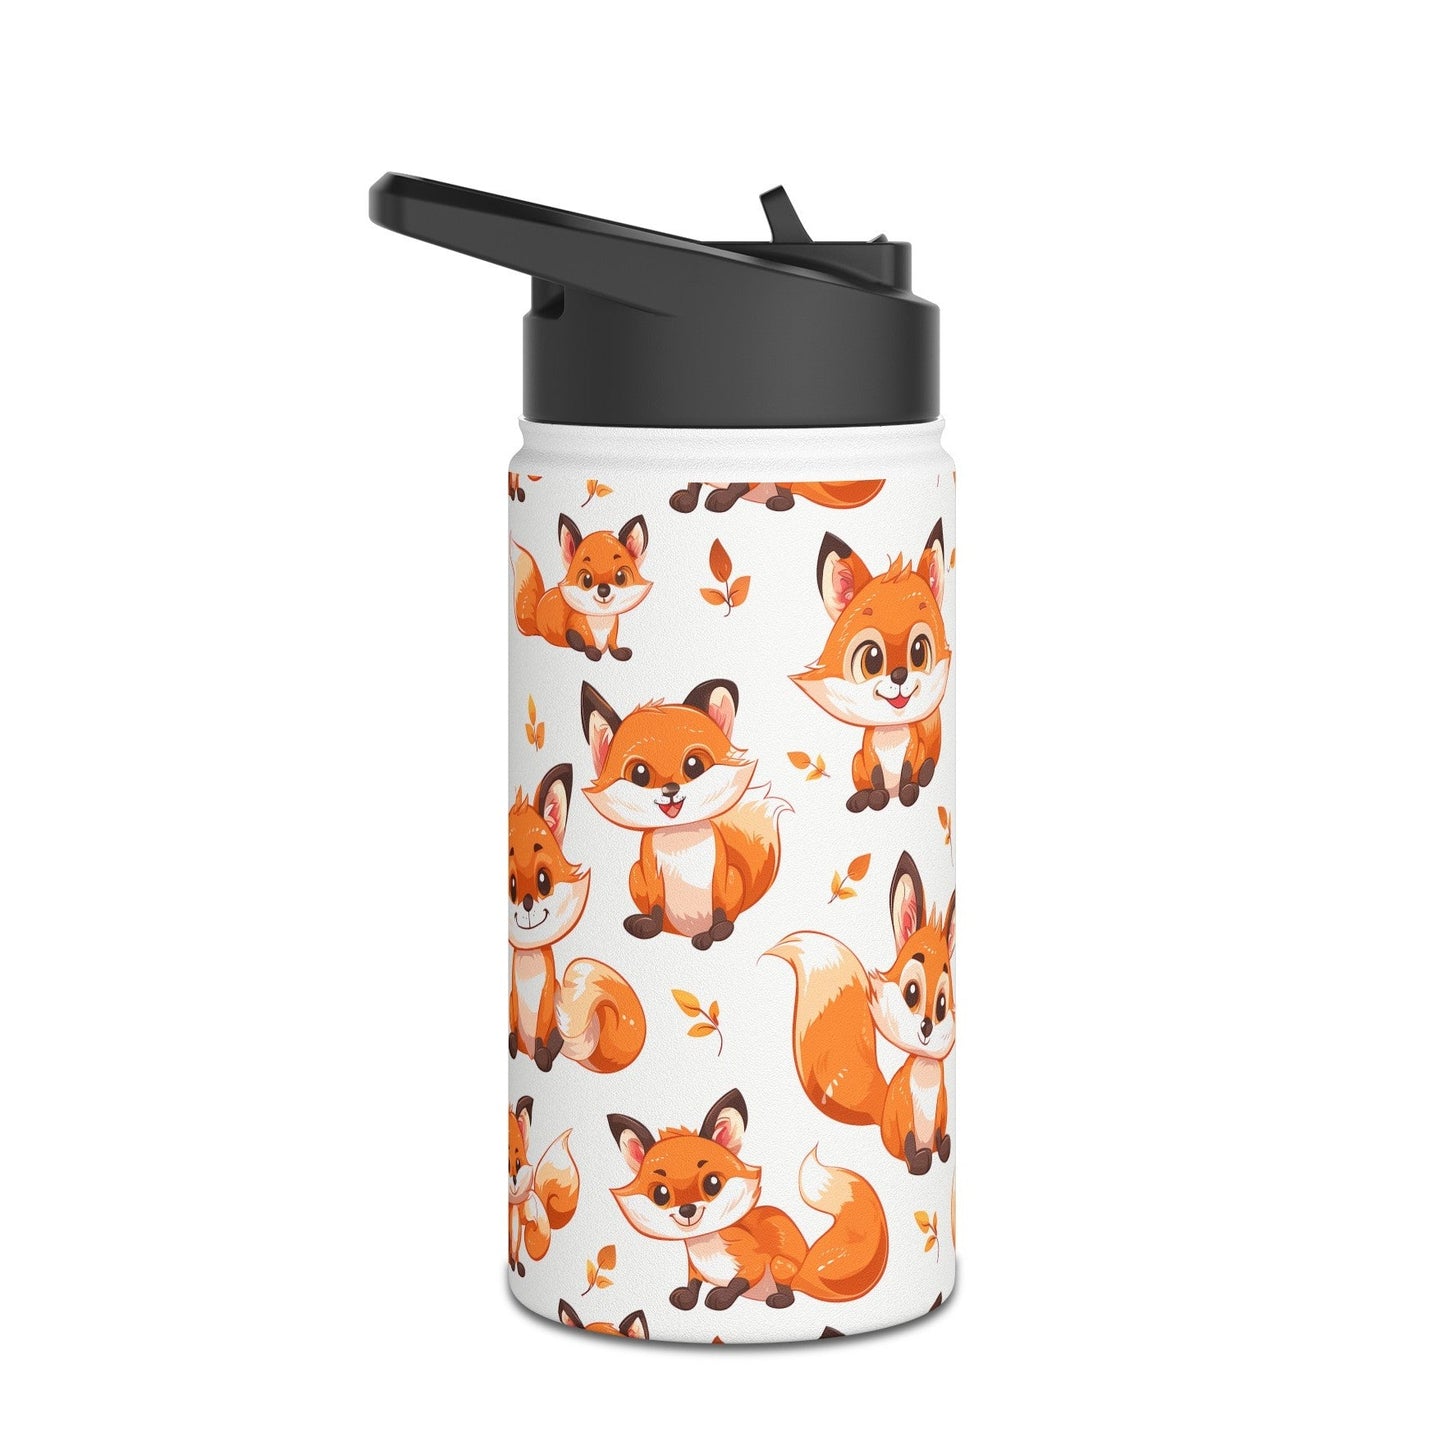 Insulated Water Bottle, 12oz, Cute Baby Foxes - Double Walled Stainless Steel Thermos, Keeps Drinks Hot or Cold